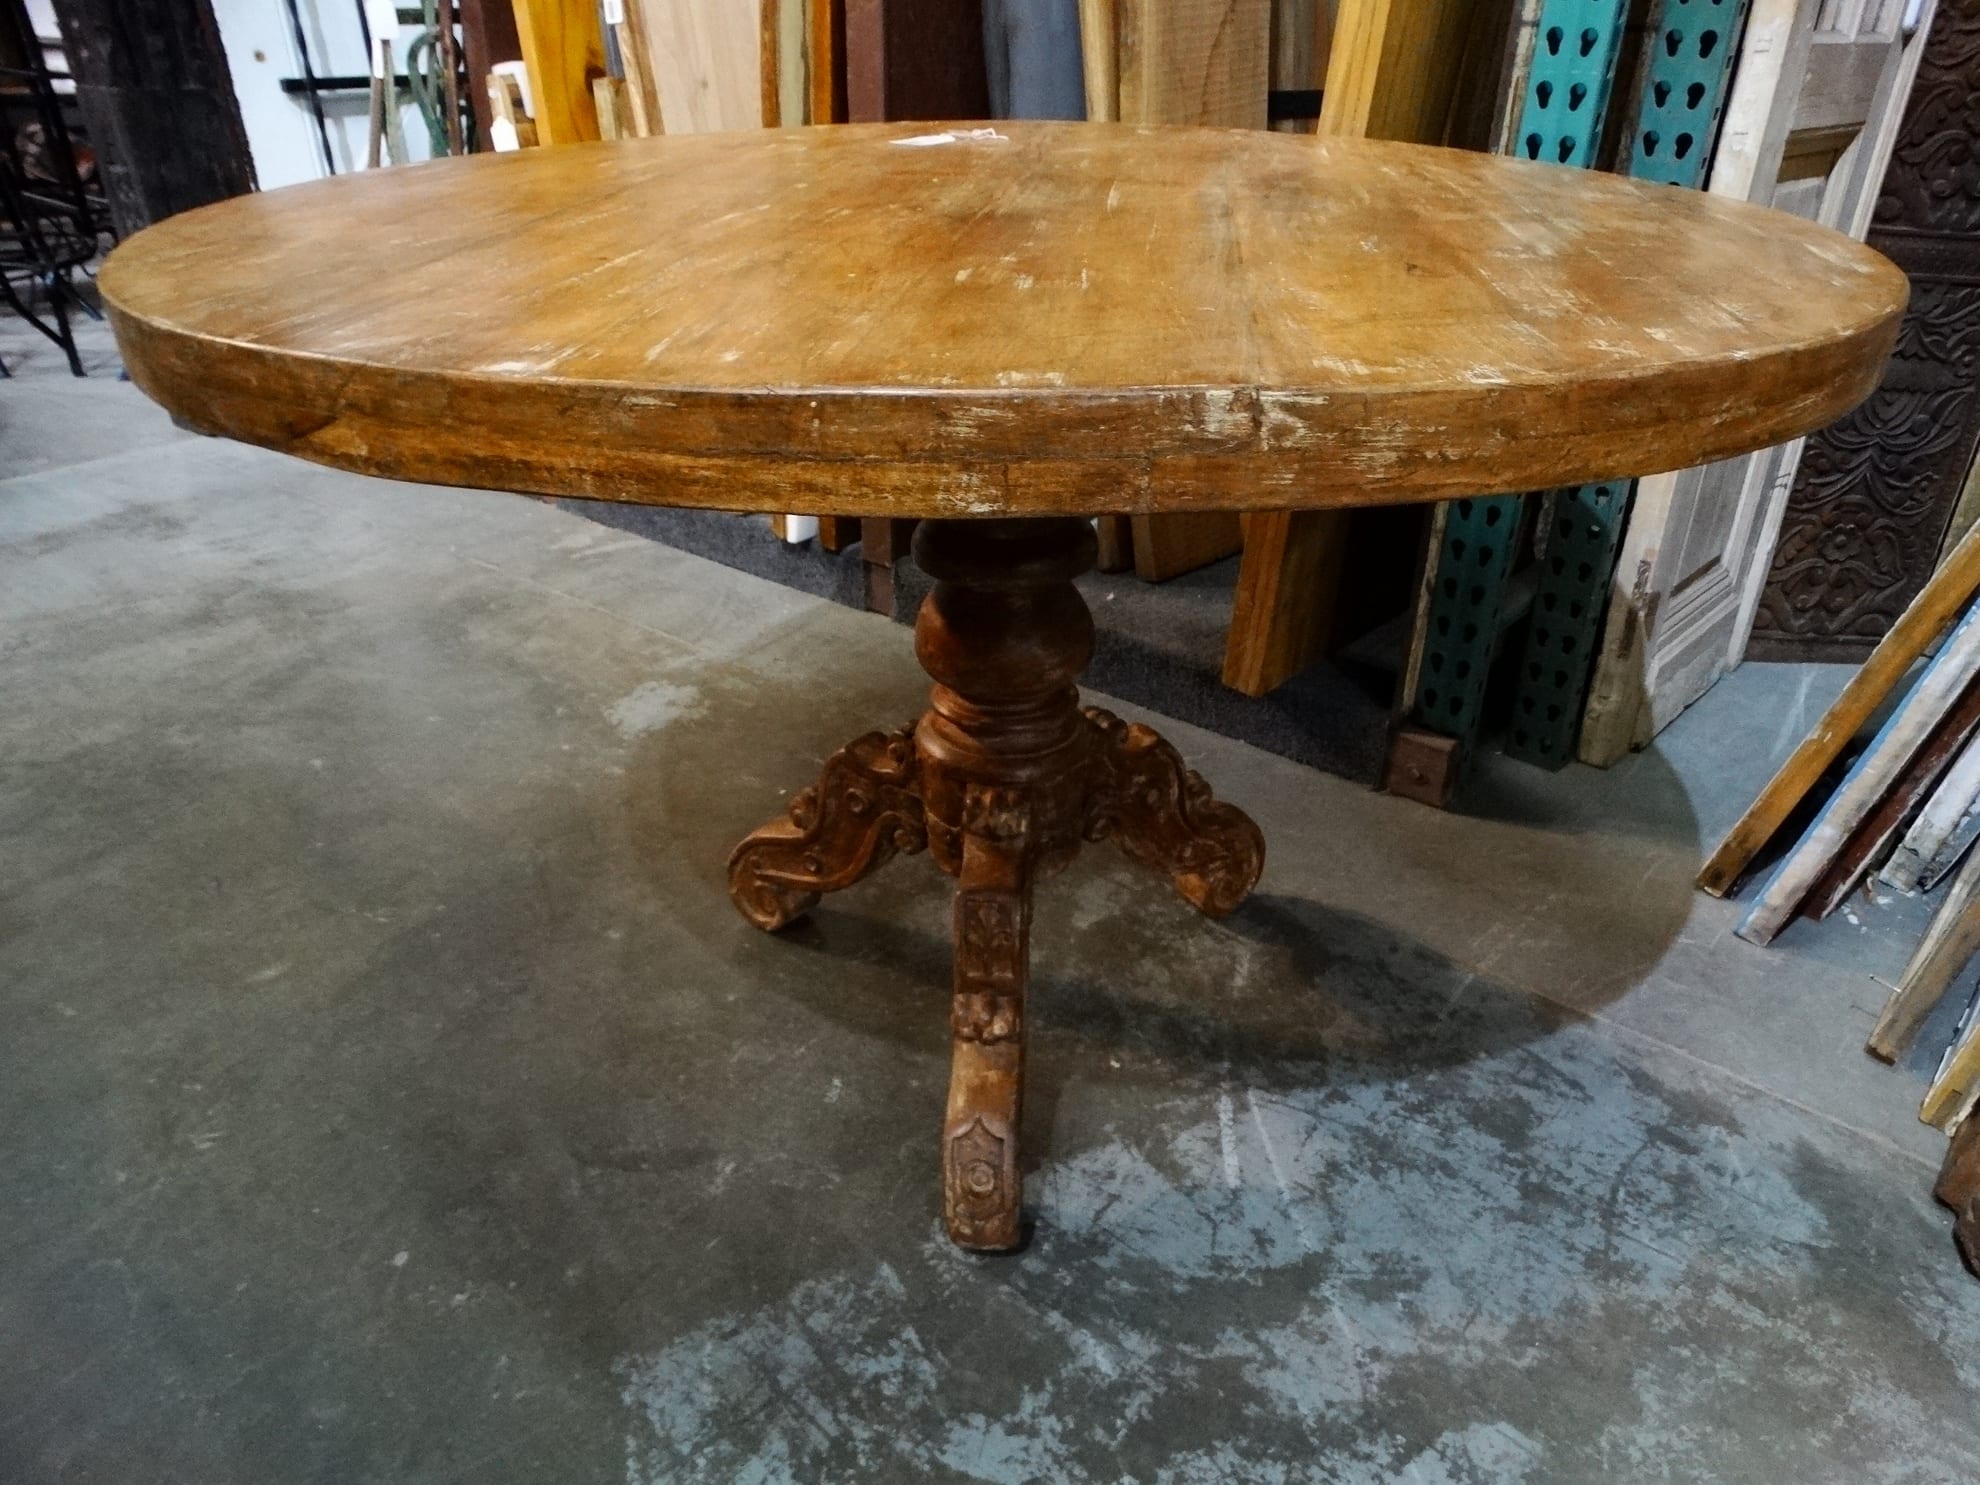 Farmhouse Dining Round Table Has A, Rustic Wooden Round Dining Table